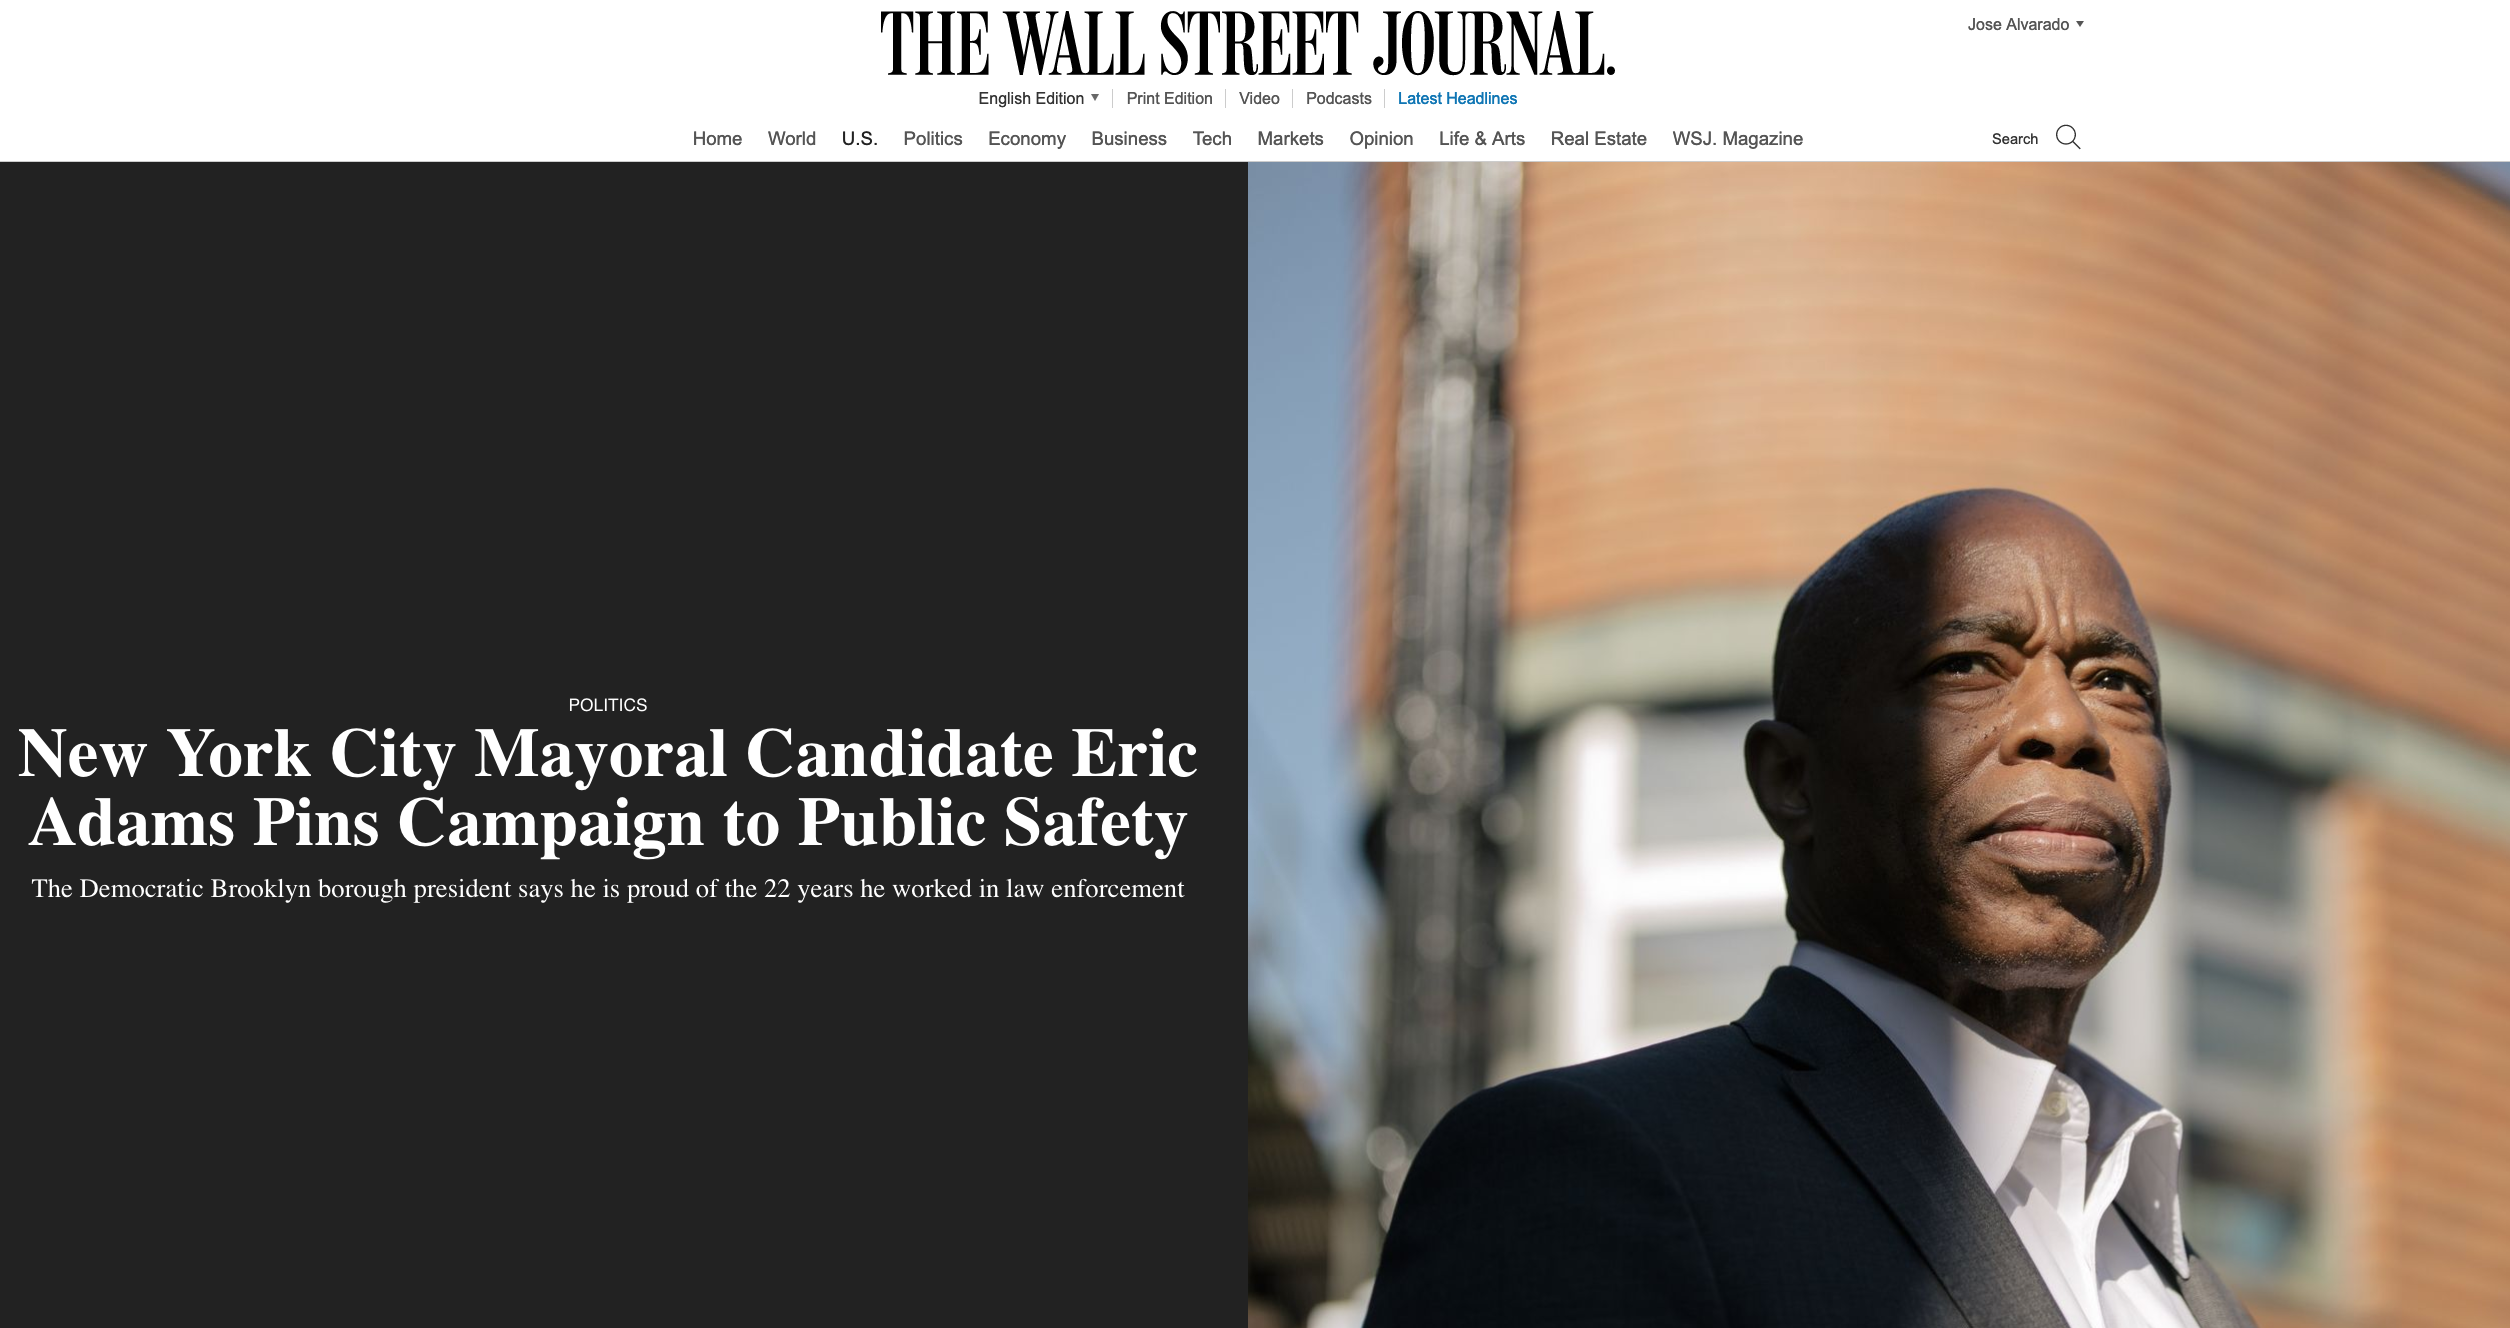 for The Wall Street Journal: New York City Mayoral Candidate Eric Adams Pins Campaign to Public Safety 